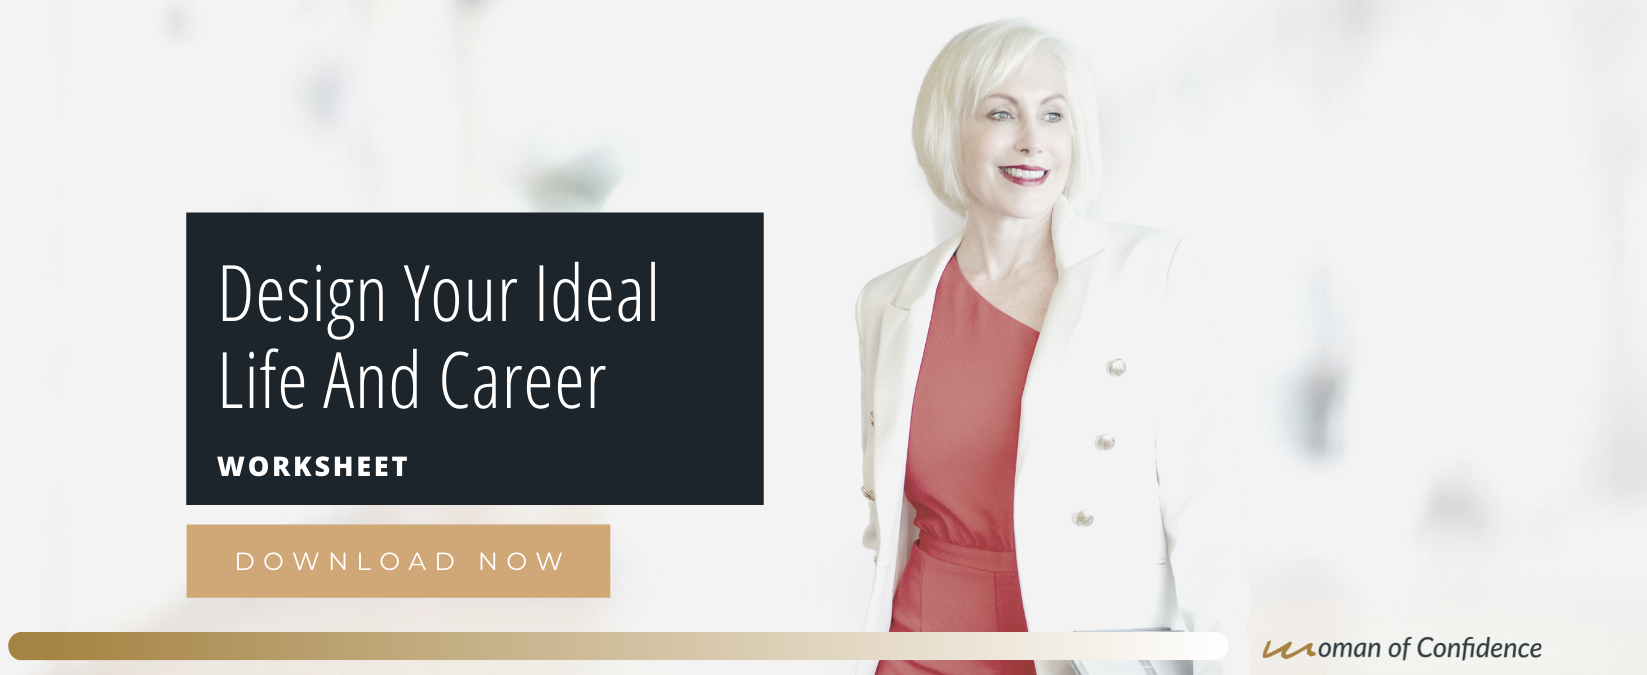 Design Your Ideal Life And Career Worksheet by Suzie Lightfoot